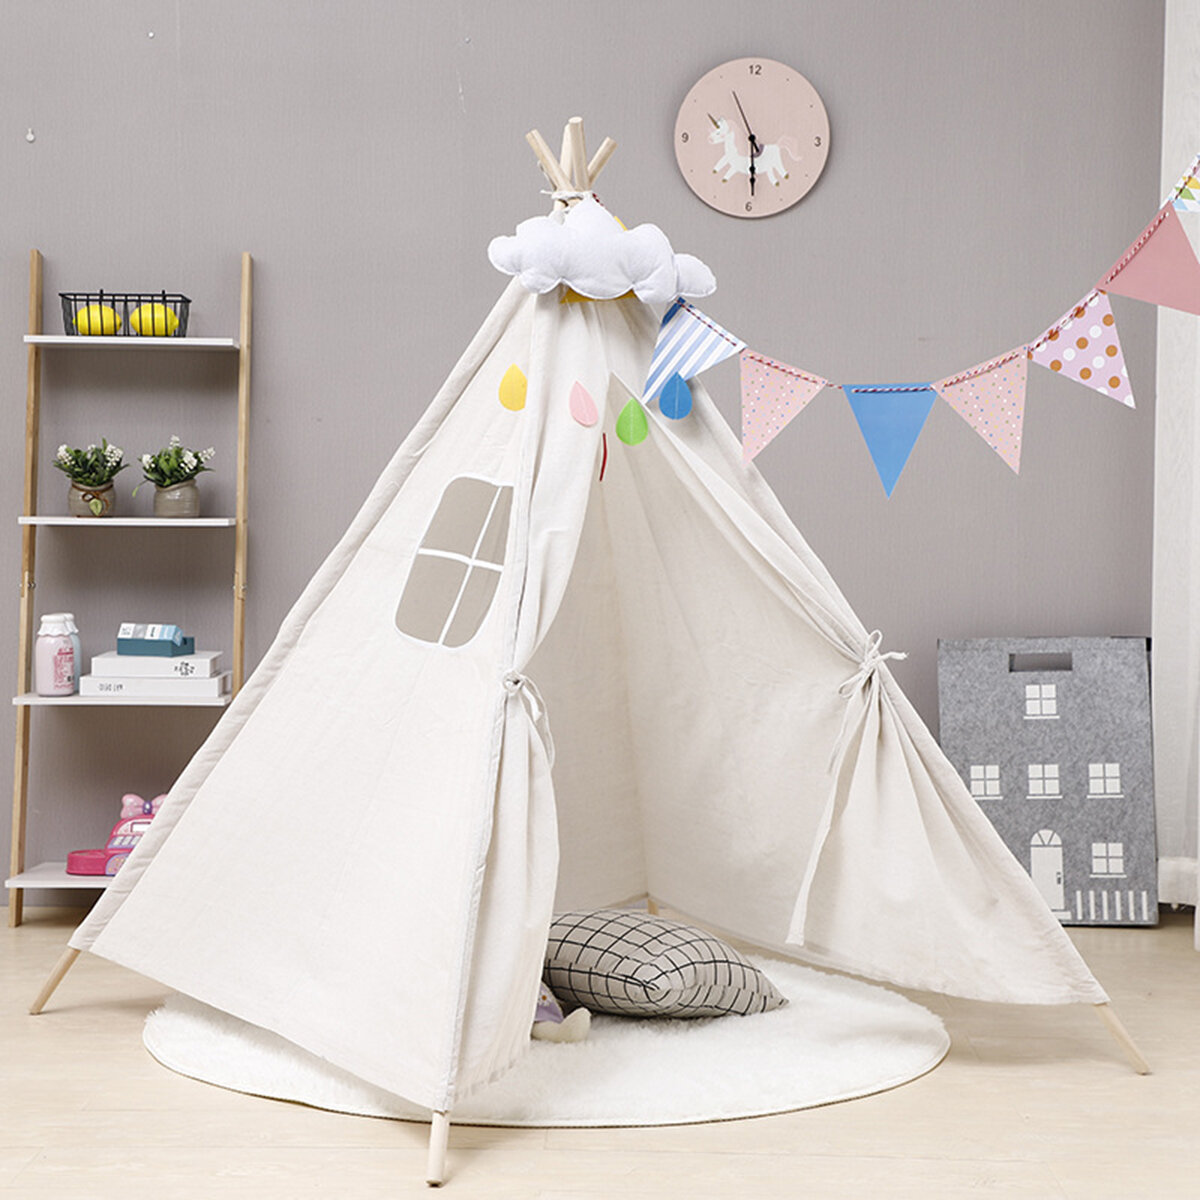 1.6M Large Teepee Tent Kids Cotton Canvas Pretend Play House Boy Girls Wigwam Gift